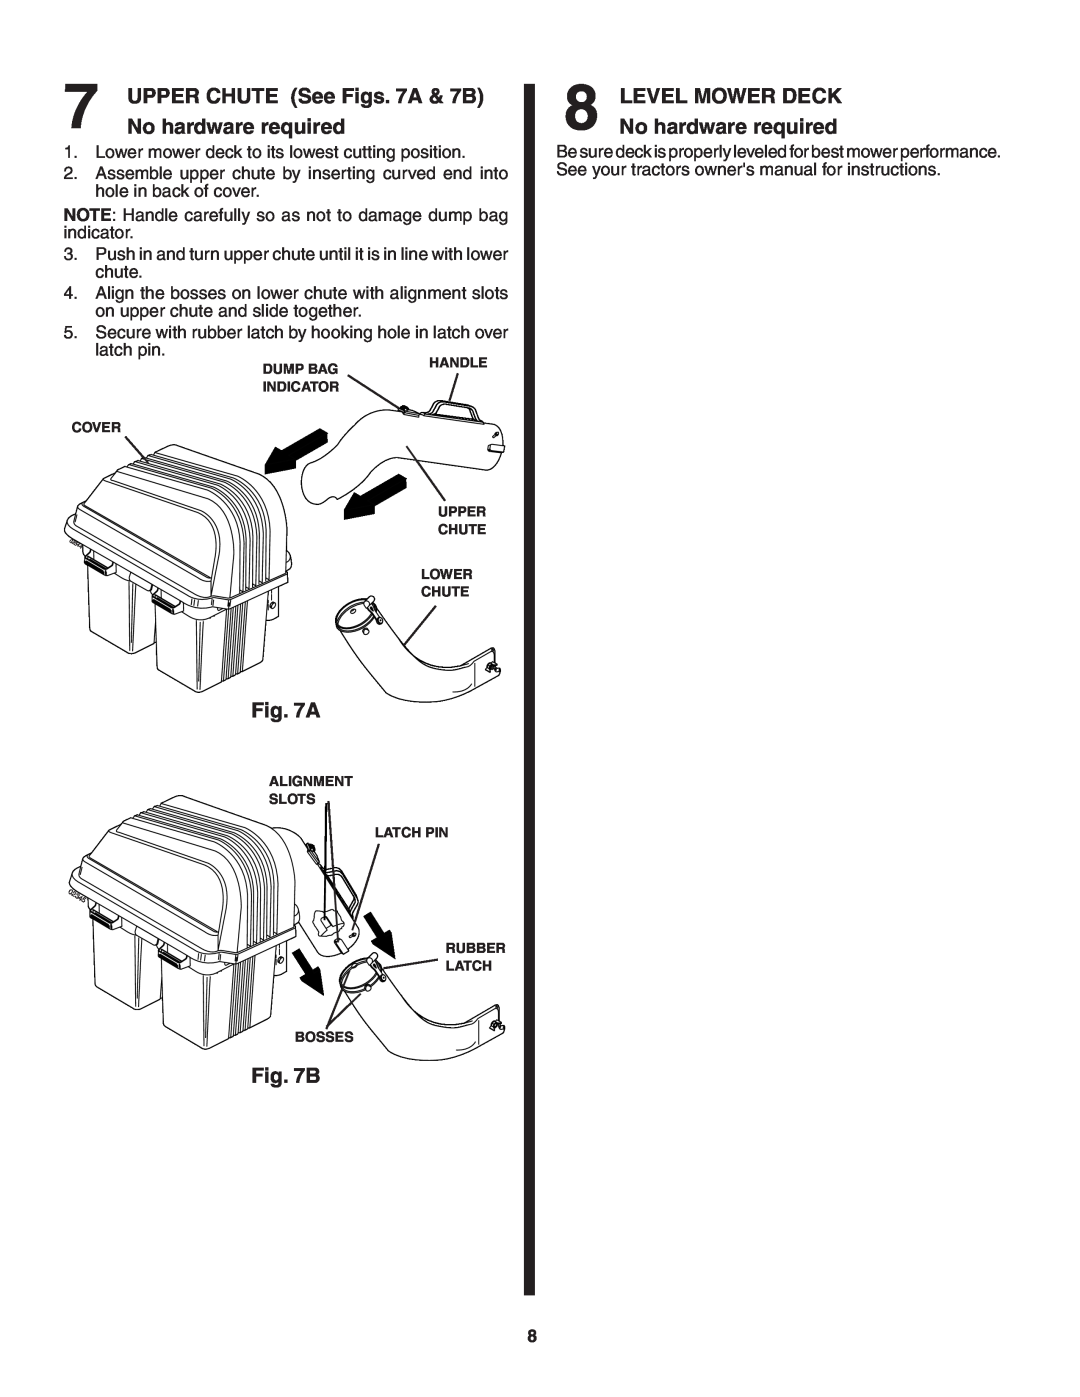 Poulan 183159, QC38B, 954 14 01-10 owner manual UPPER CHUTE See Figs. 7A & 7B, LEVEL MOWER DECK No hardware required 